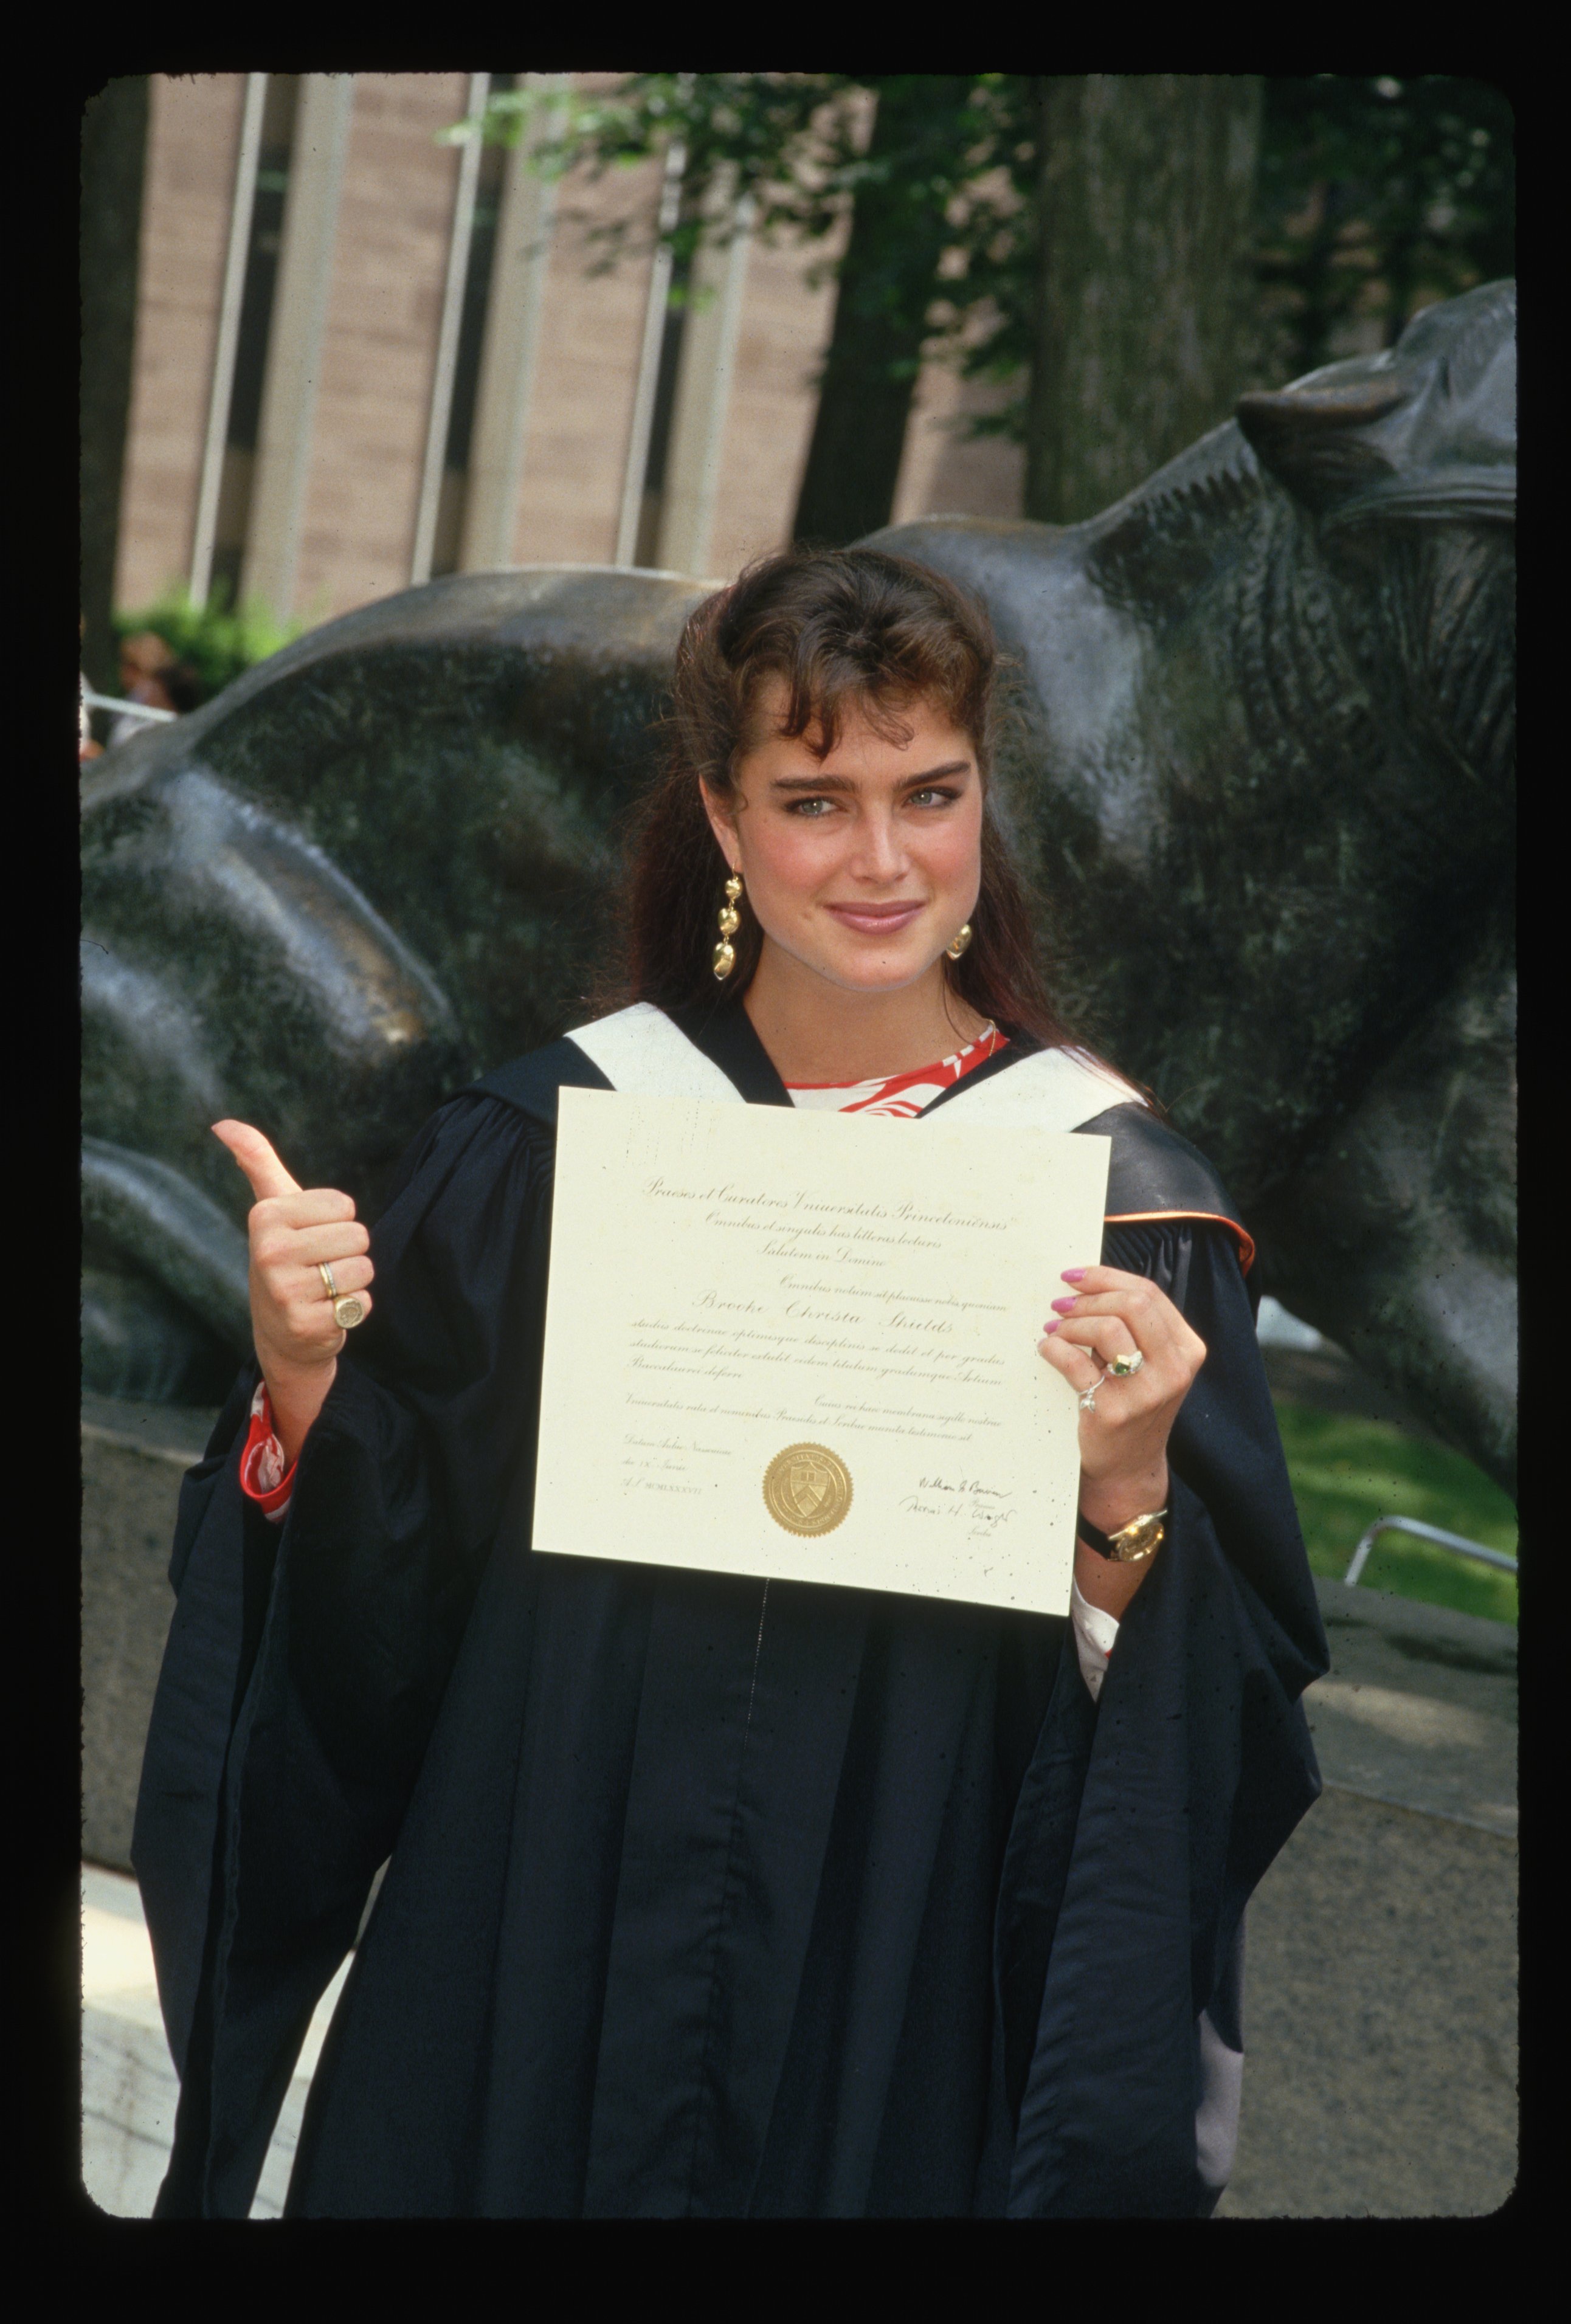 Brooke Shields posing while holding her diploma from Princeton University on her graduation day. / Source: Getty Images